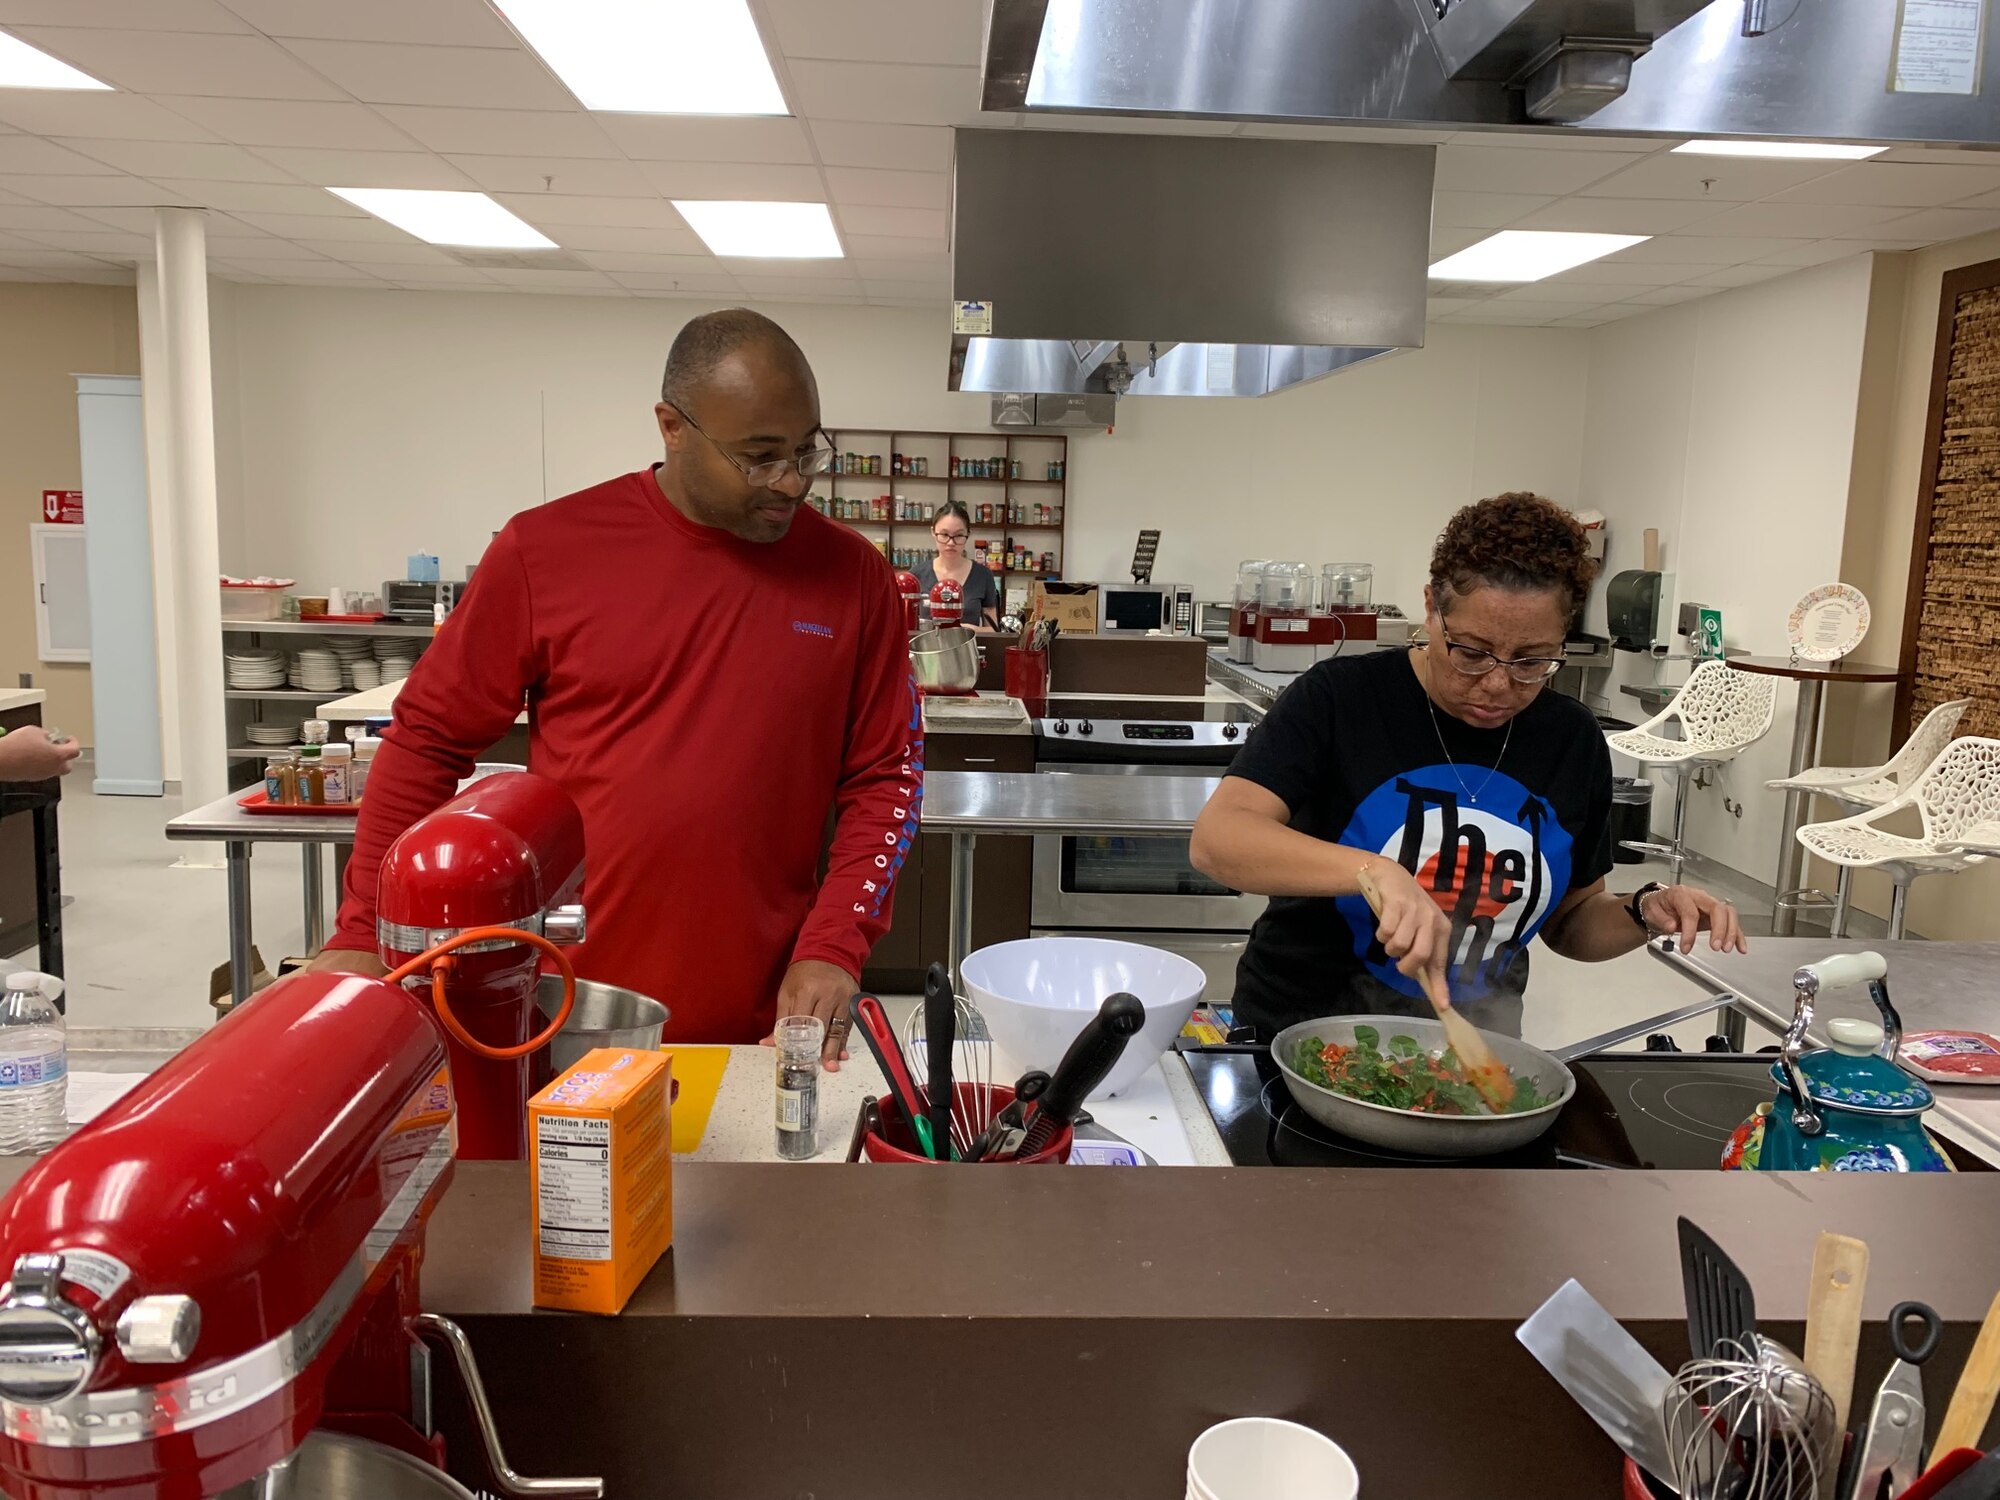 SMSgt Gregory Brown and Allison Brown cook several ingredients to prepare a Mediterranean stir fry dish. (Courtesy photo)